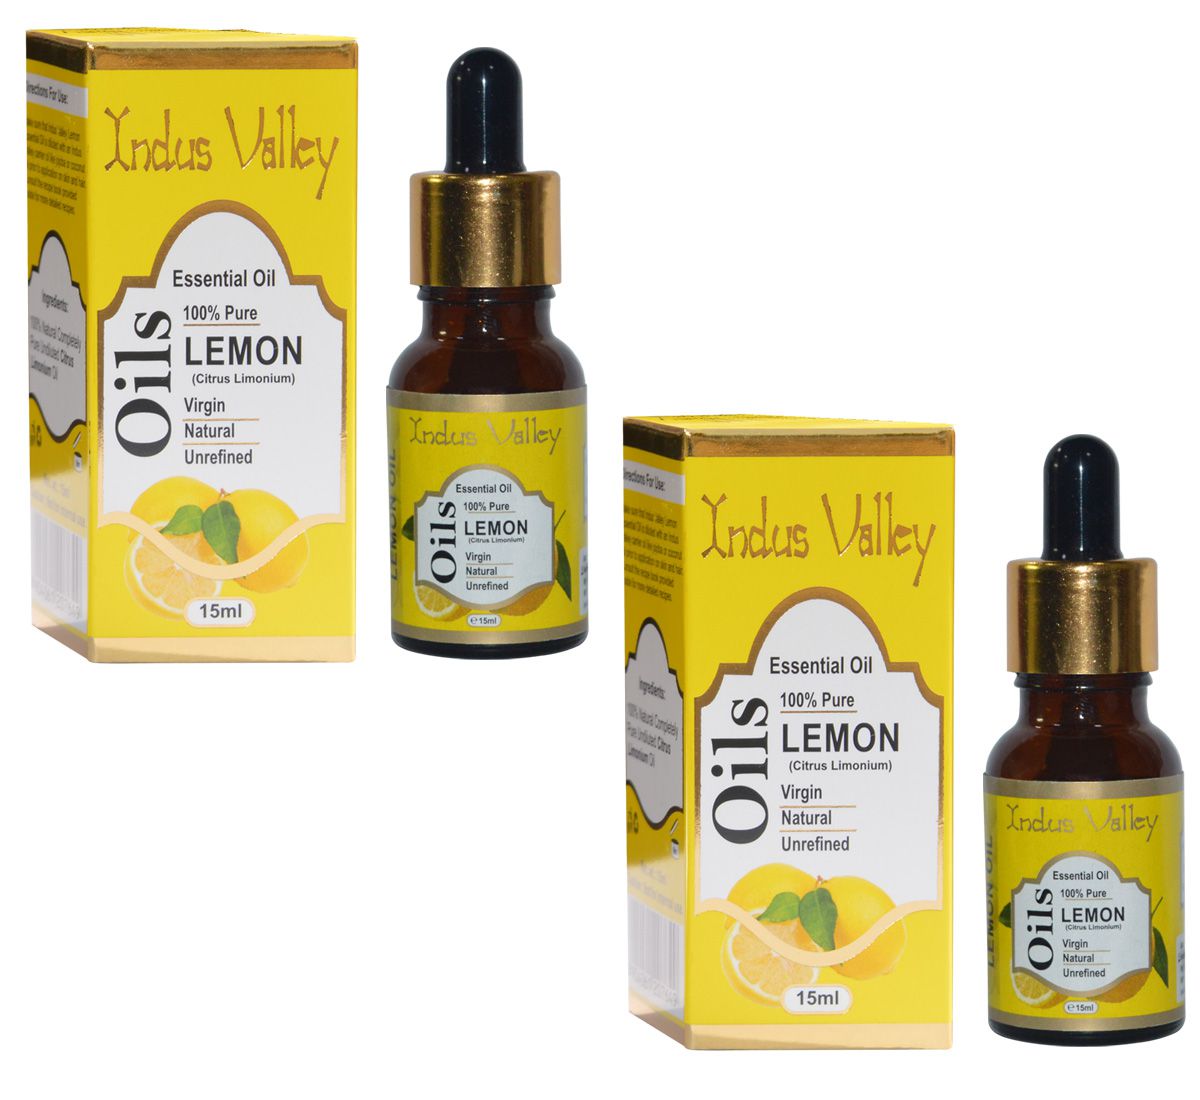     			Indus Valley 100% Pure Lemon Essential Oil - Twin Pack (30 ml)